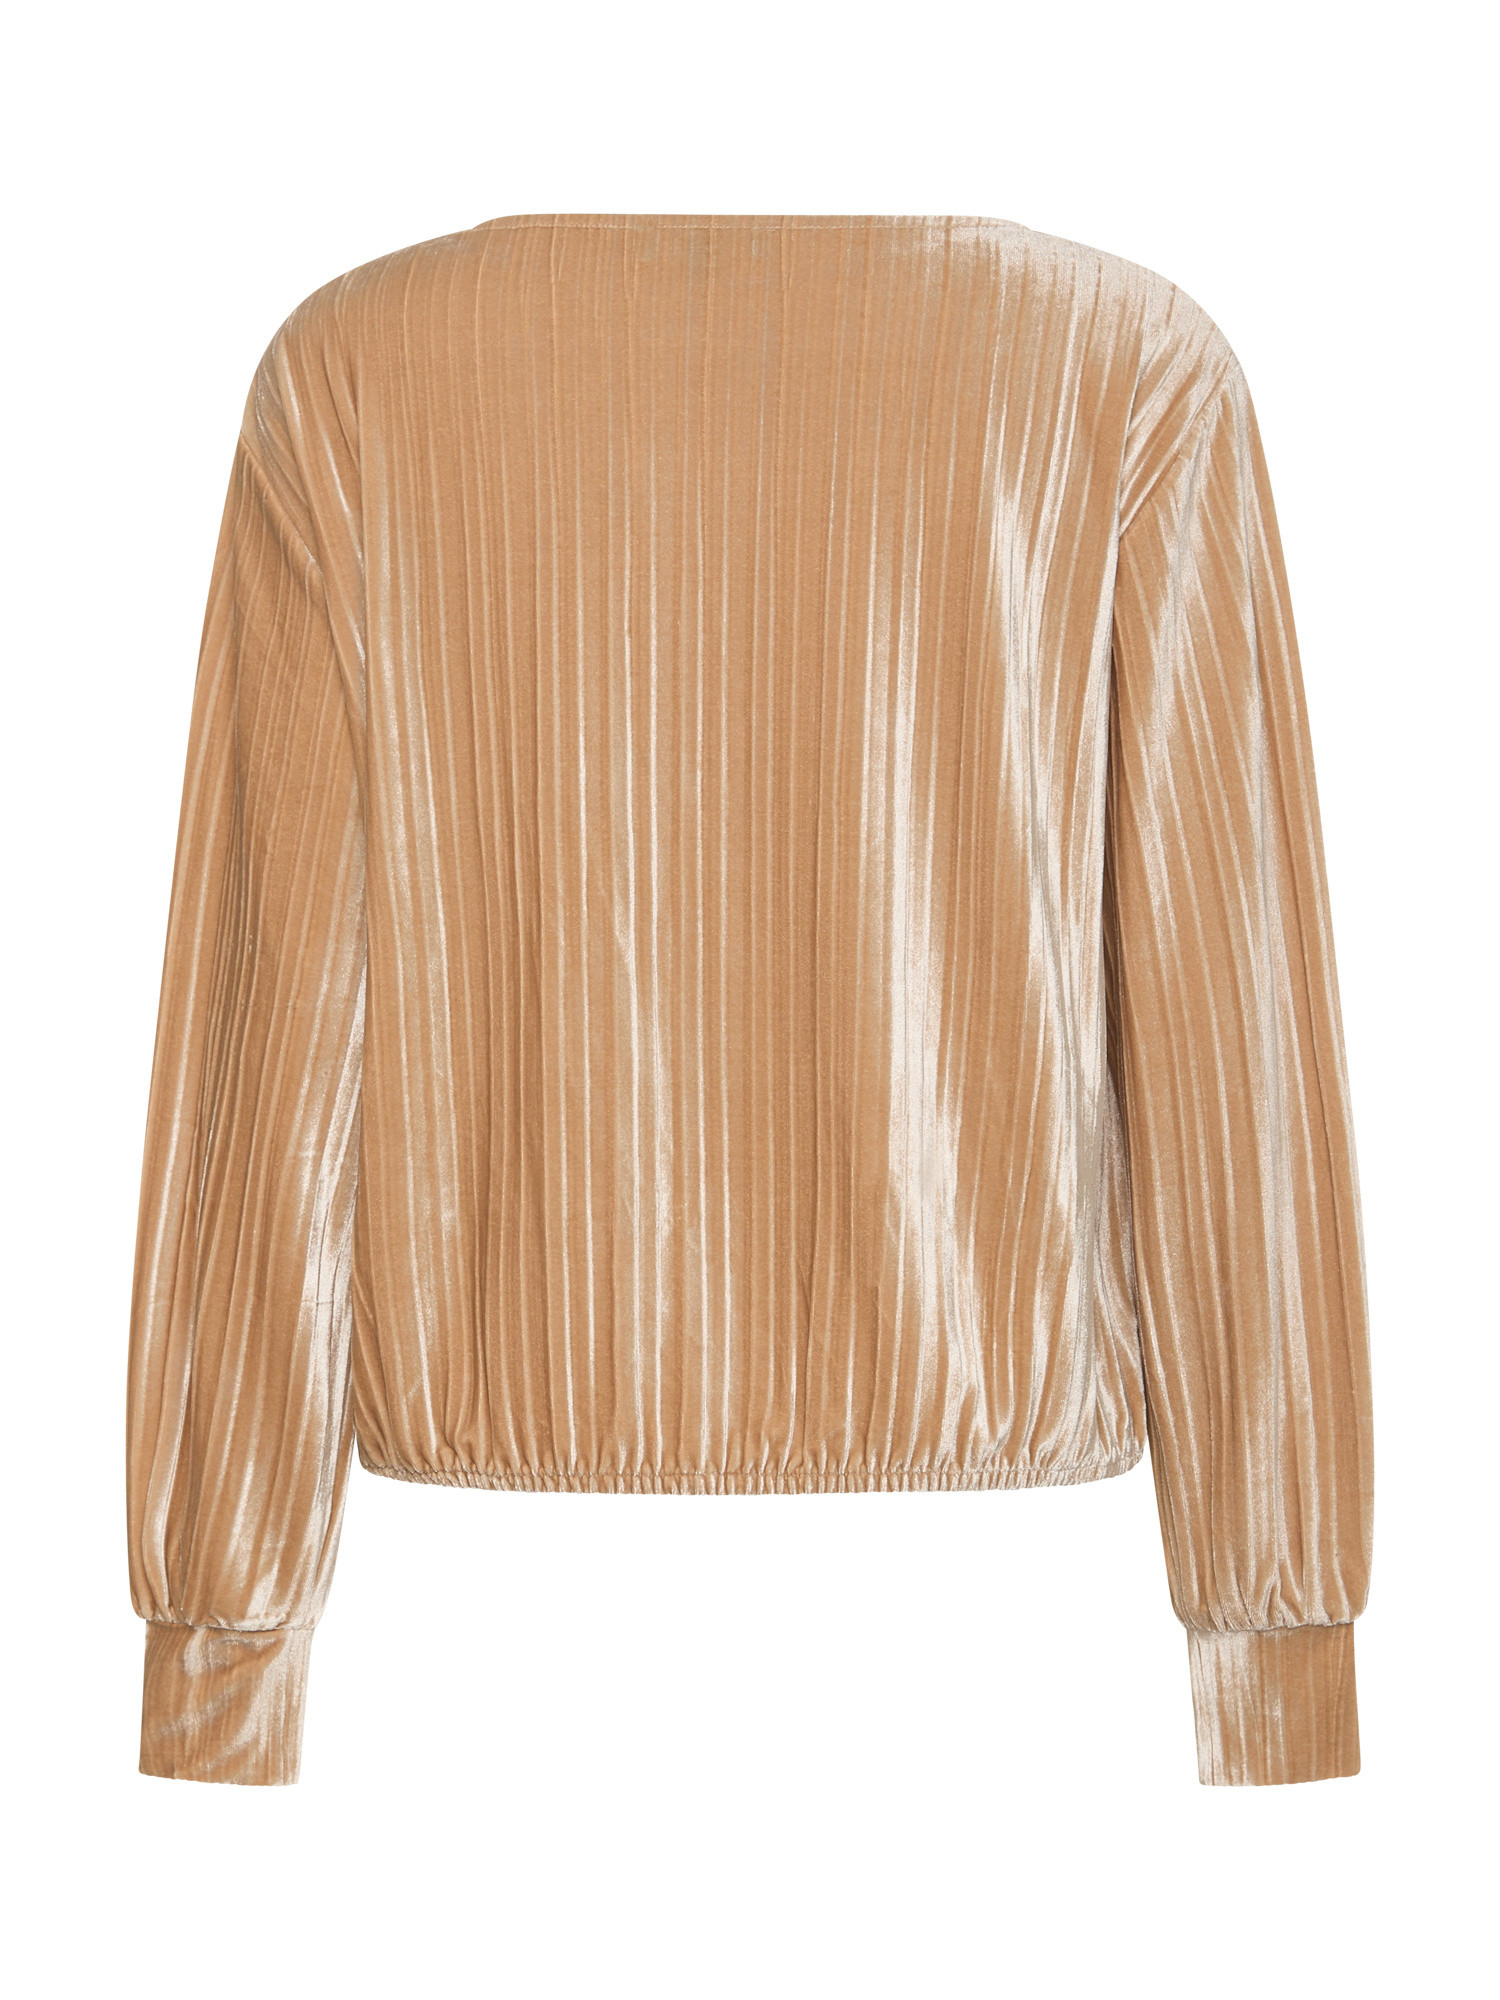 Koan - Pleated effect velvet sweater, Champagne Yellow, large image number 1